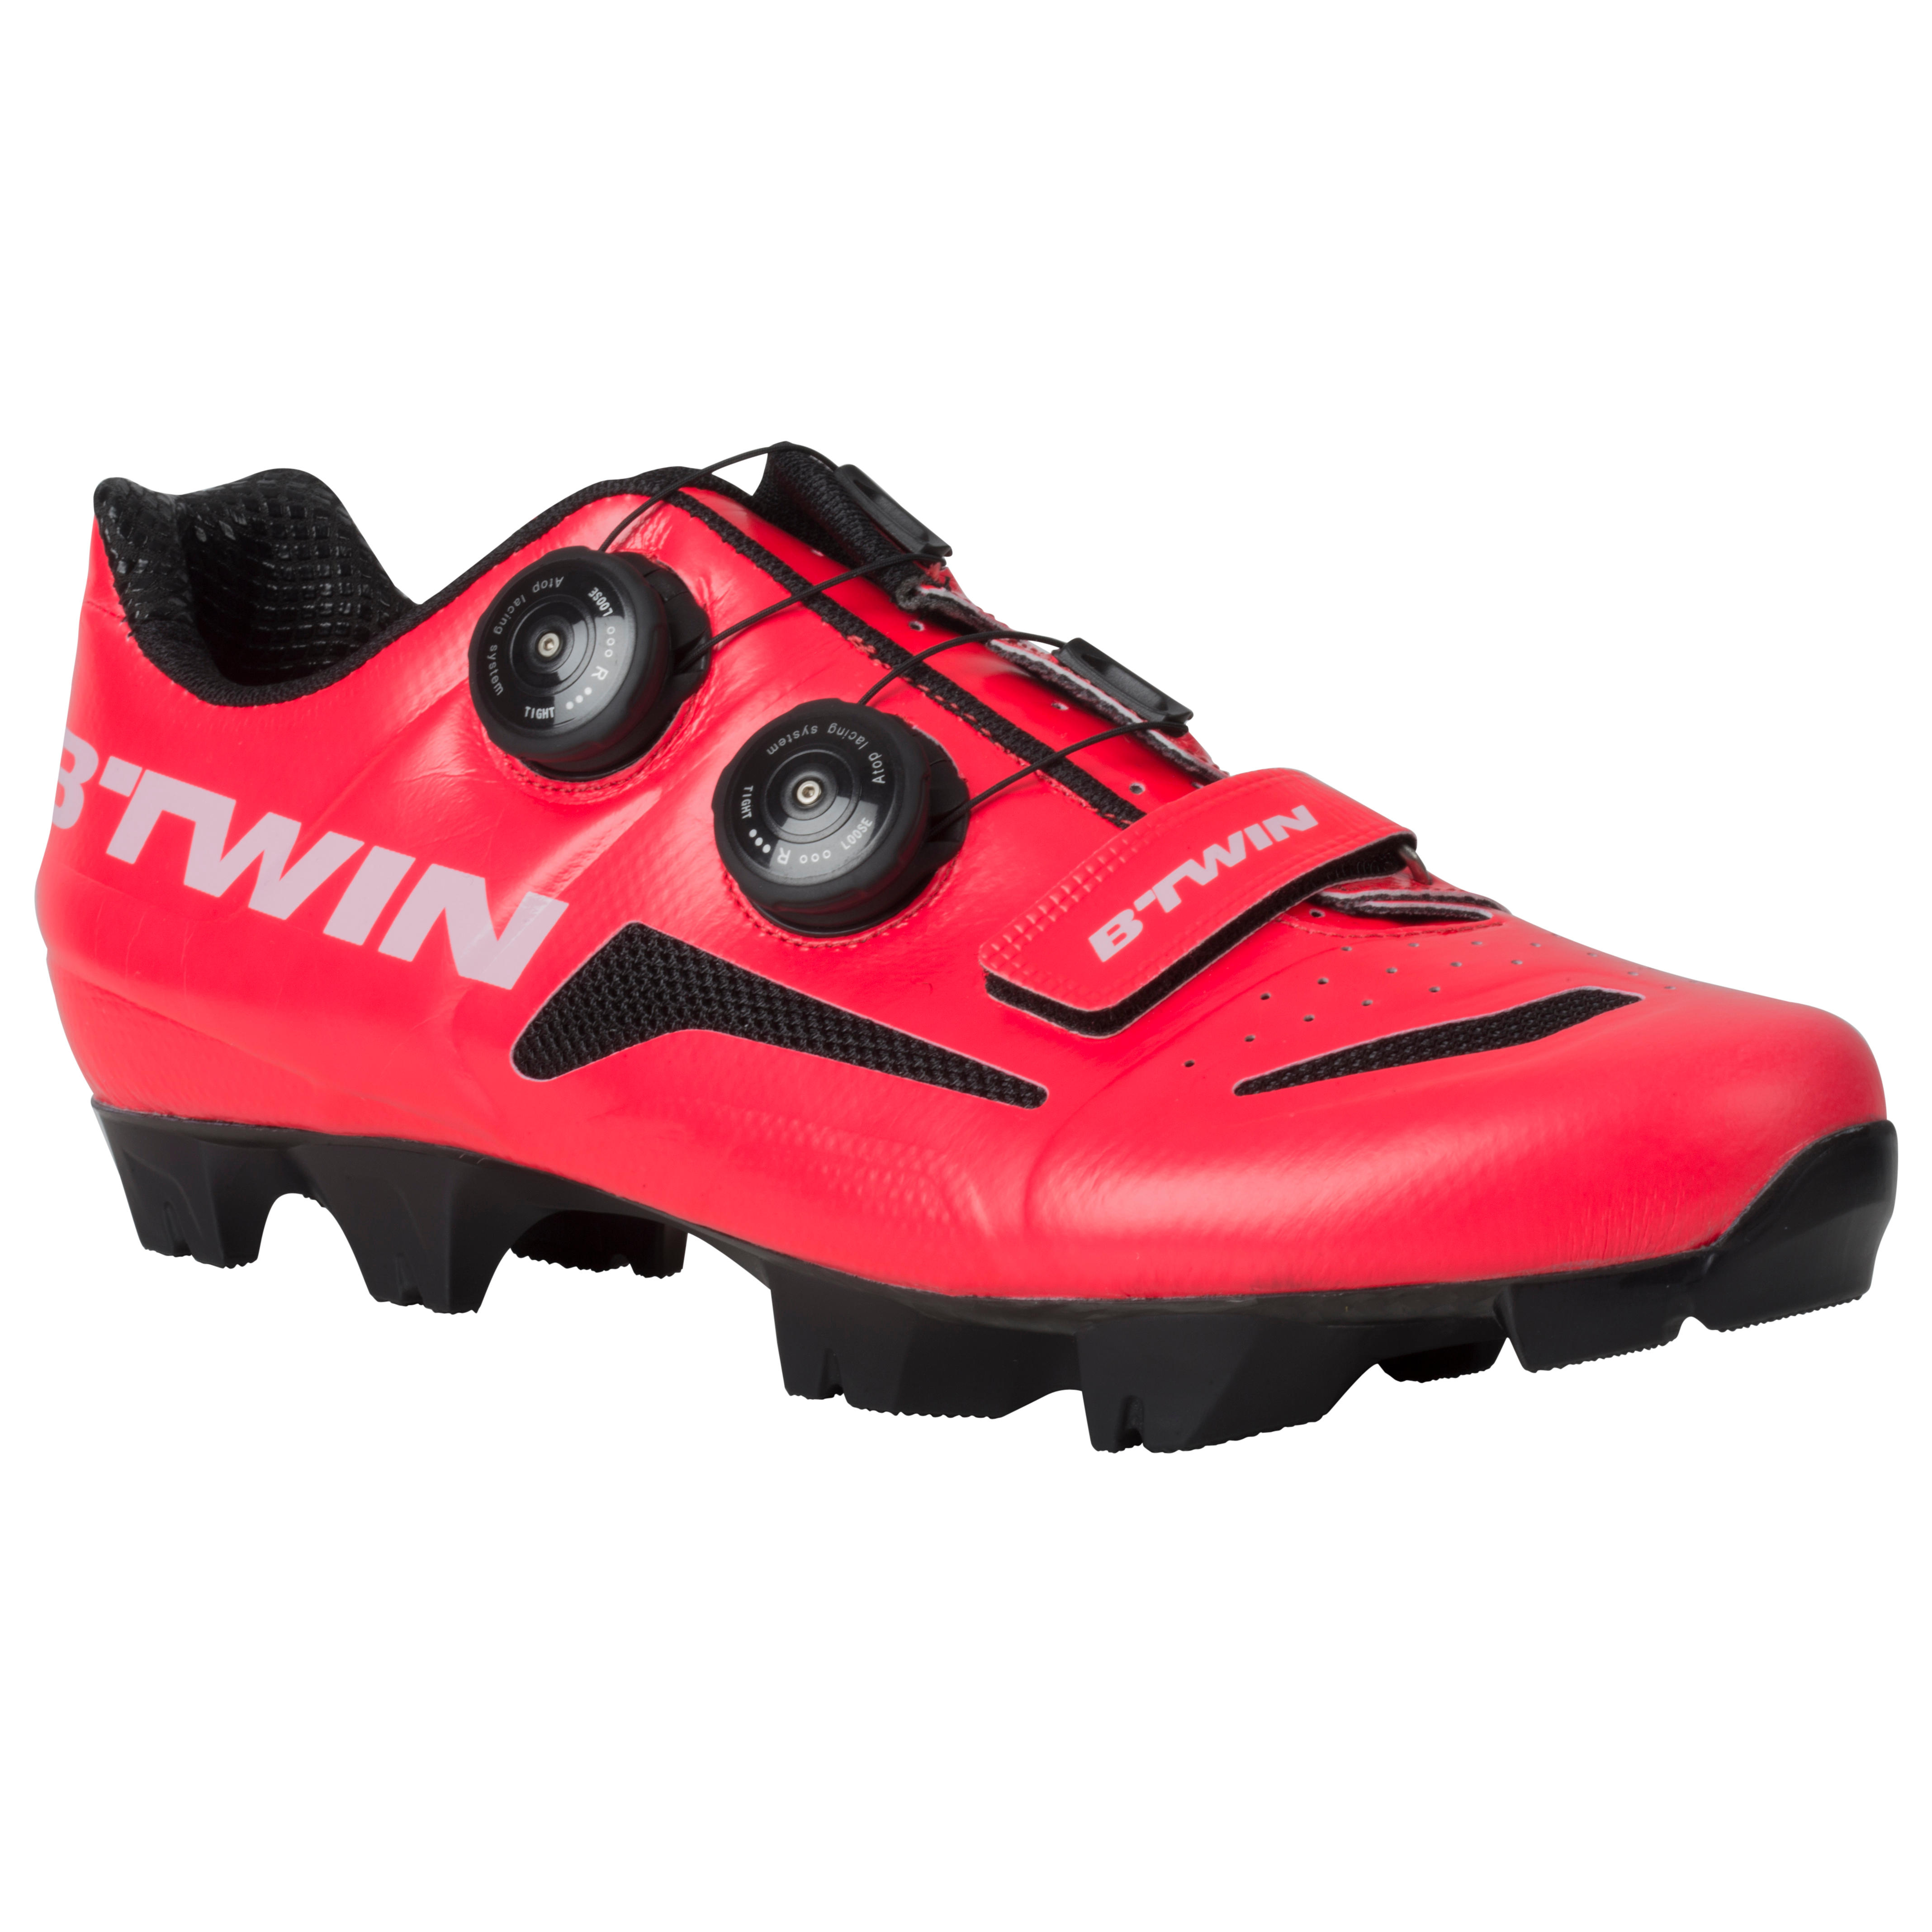 btwin 700 shoes